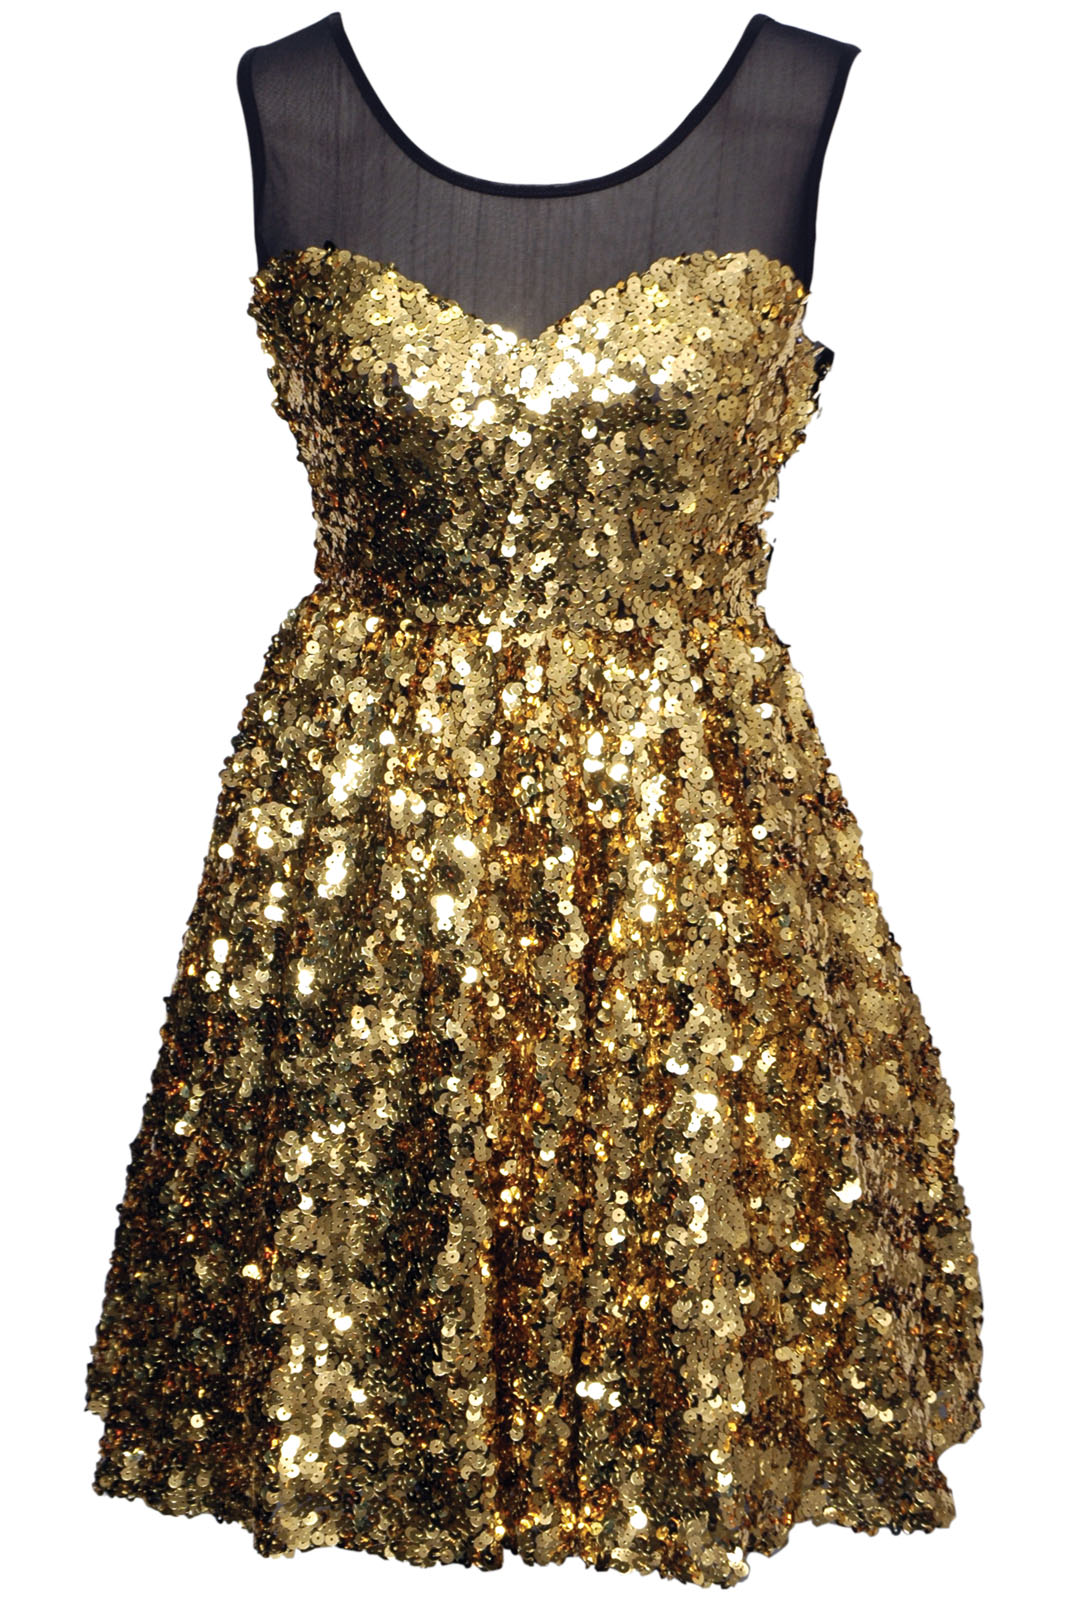 Blue And Gold Sequin Dress - Make You Look Like A Princess